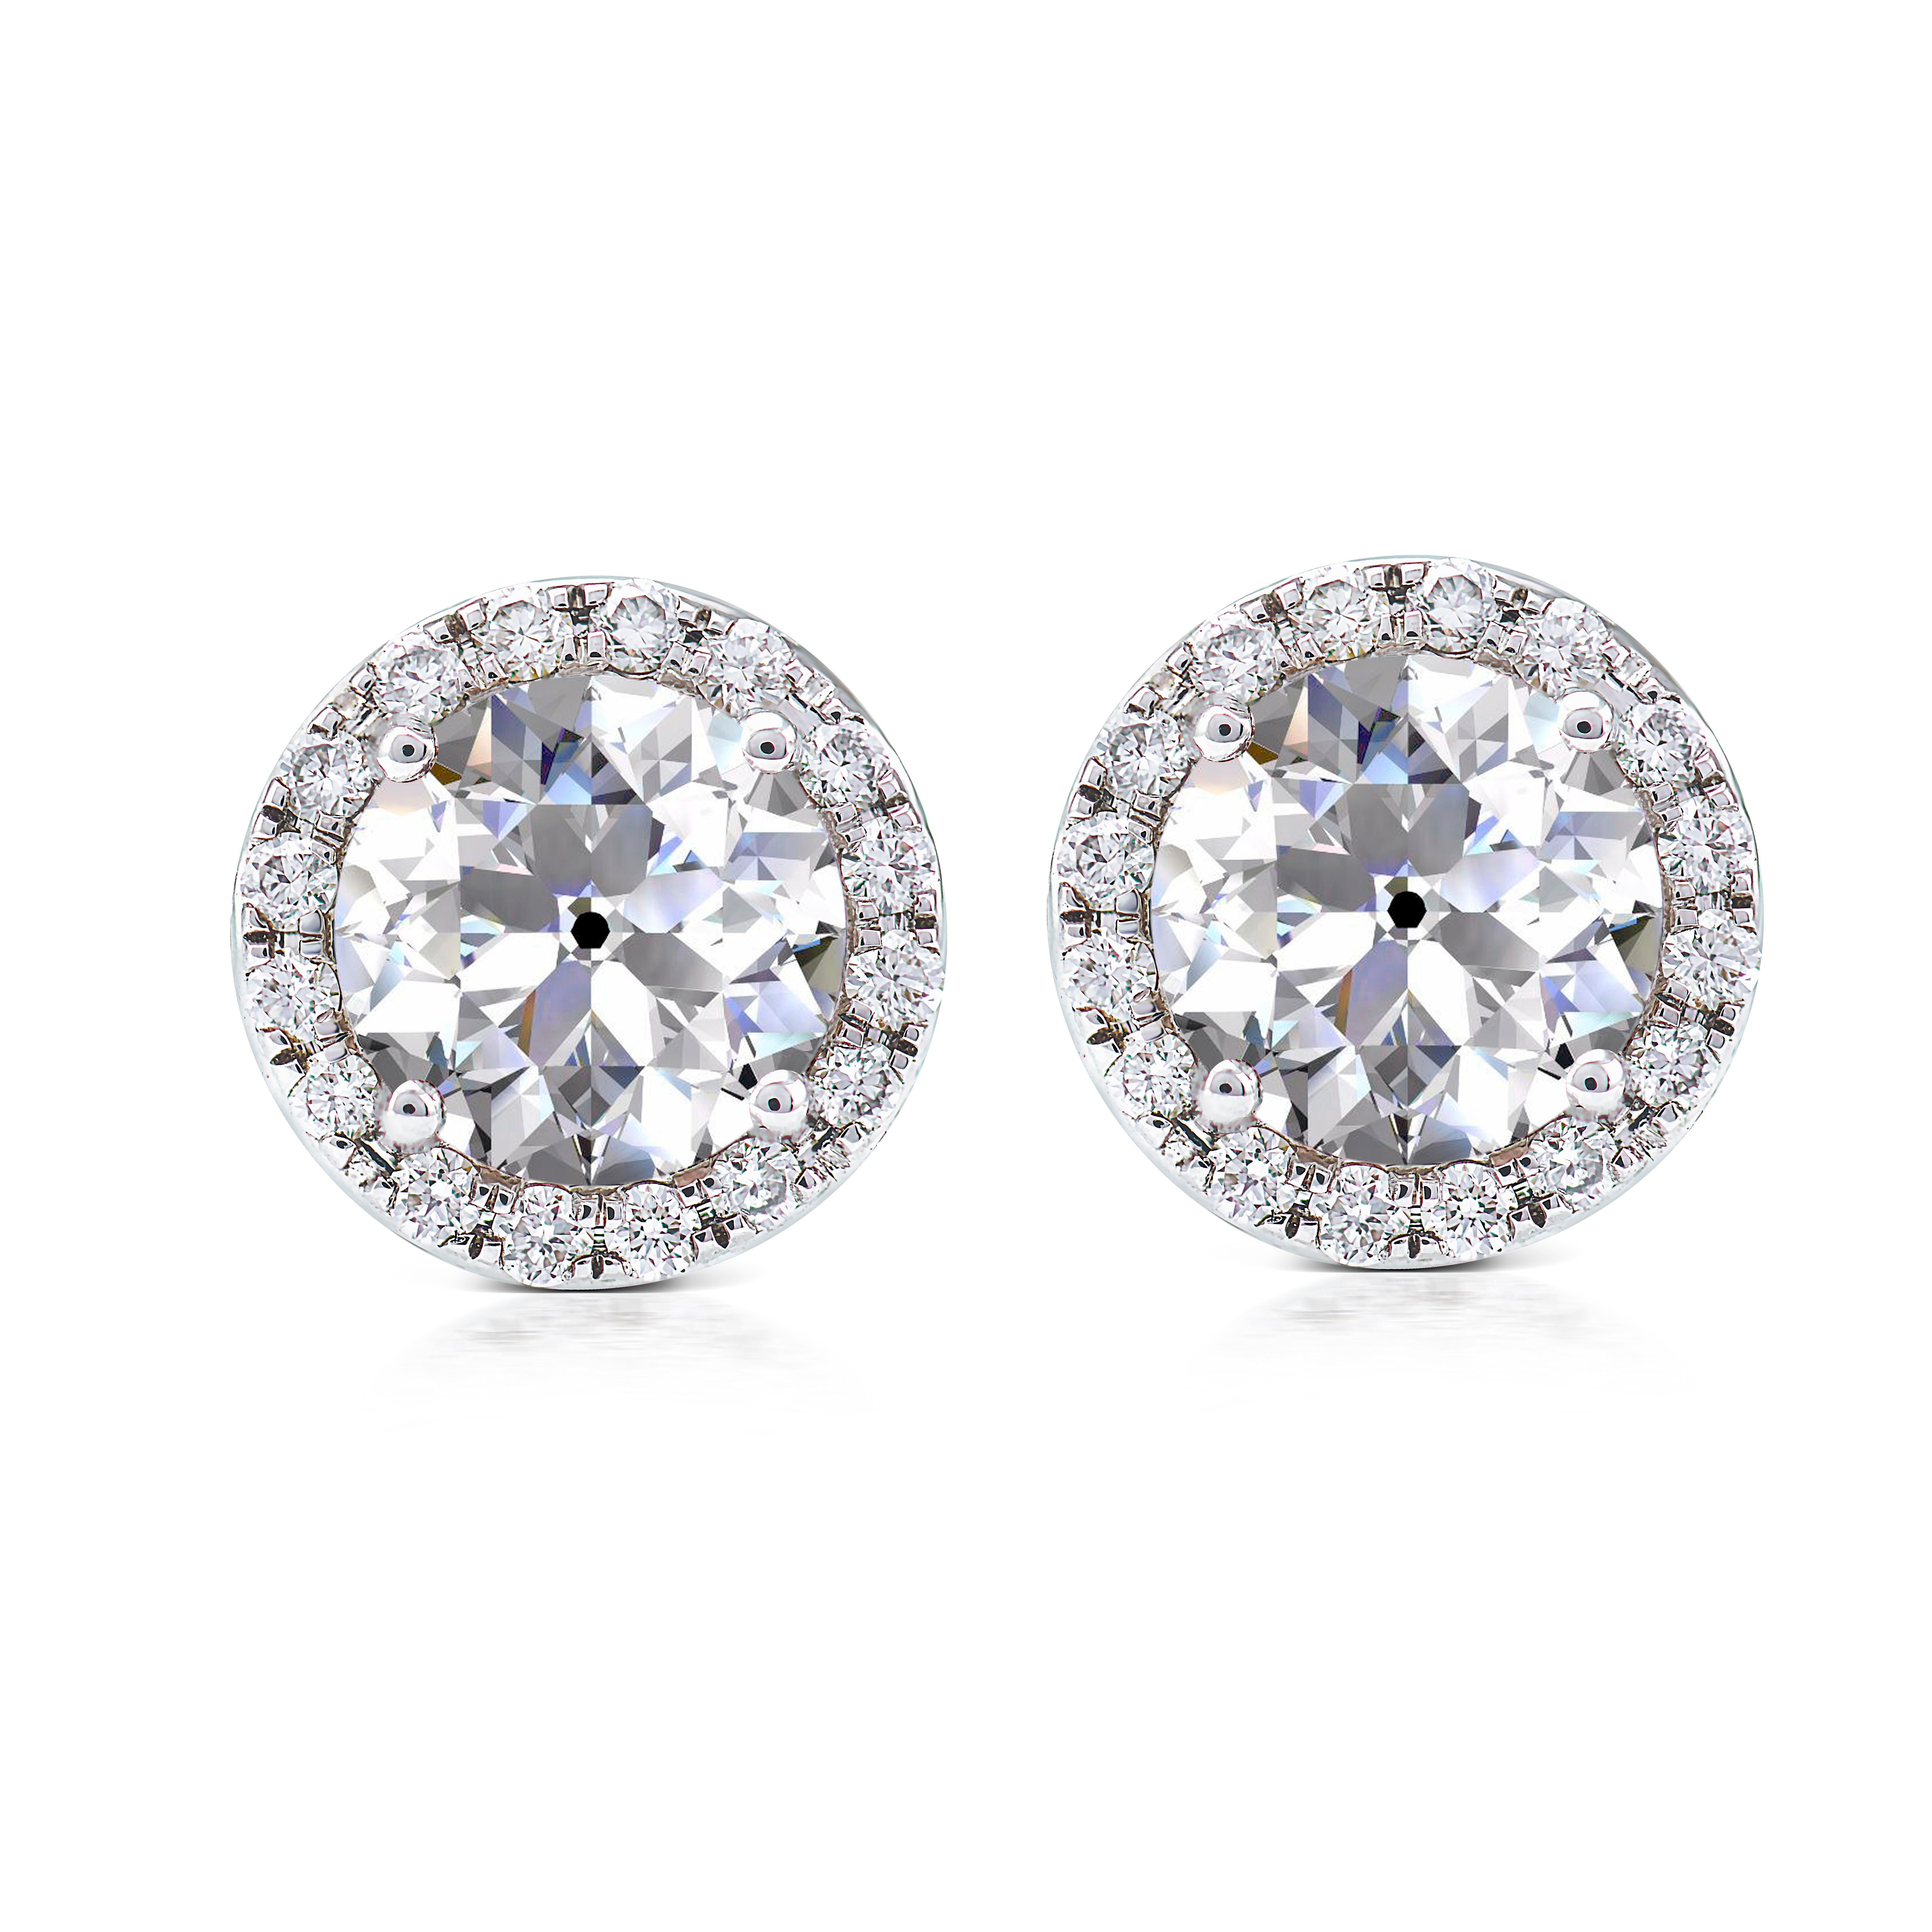 Women's 18k Gold 1.38 ct Old Mine Cut Diamond Halo Earrings Studs Contemporary Settings For Sale